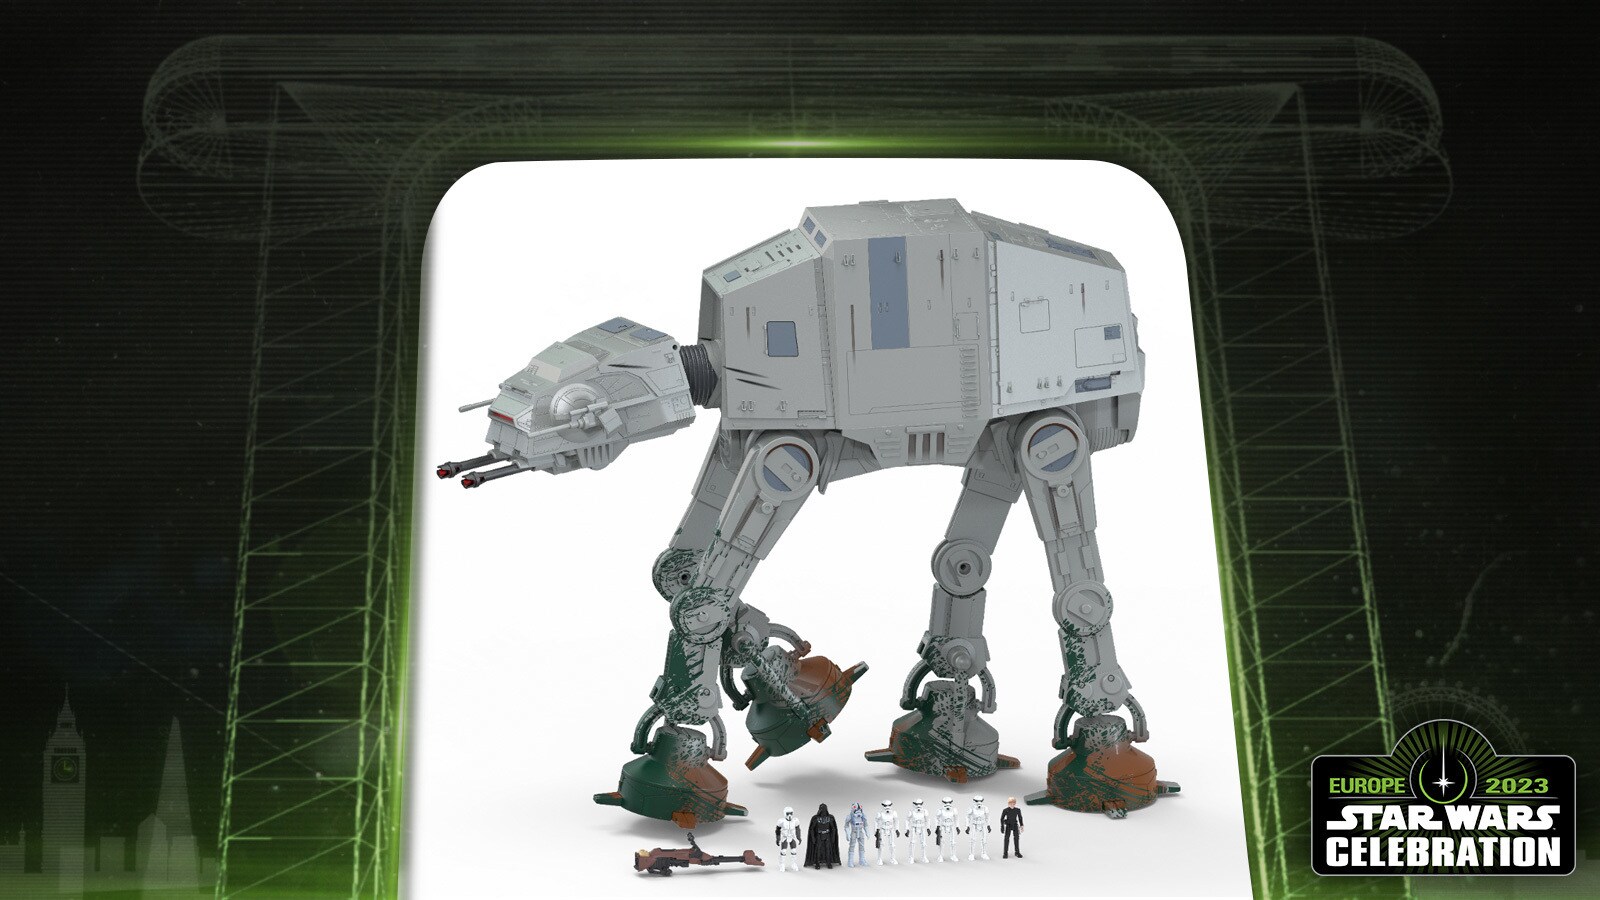 SWCE 2023: Check Out Jazwares' Star Wars Micro Galaxy Squadron Series V